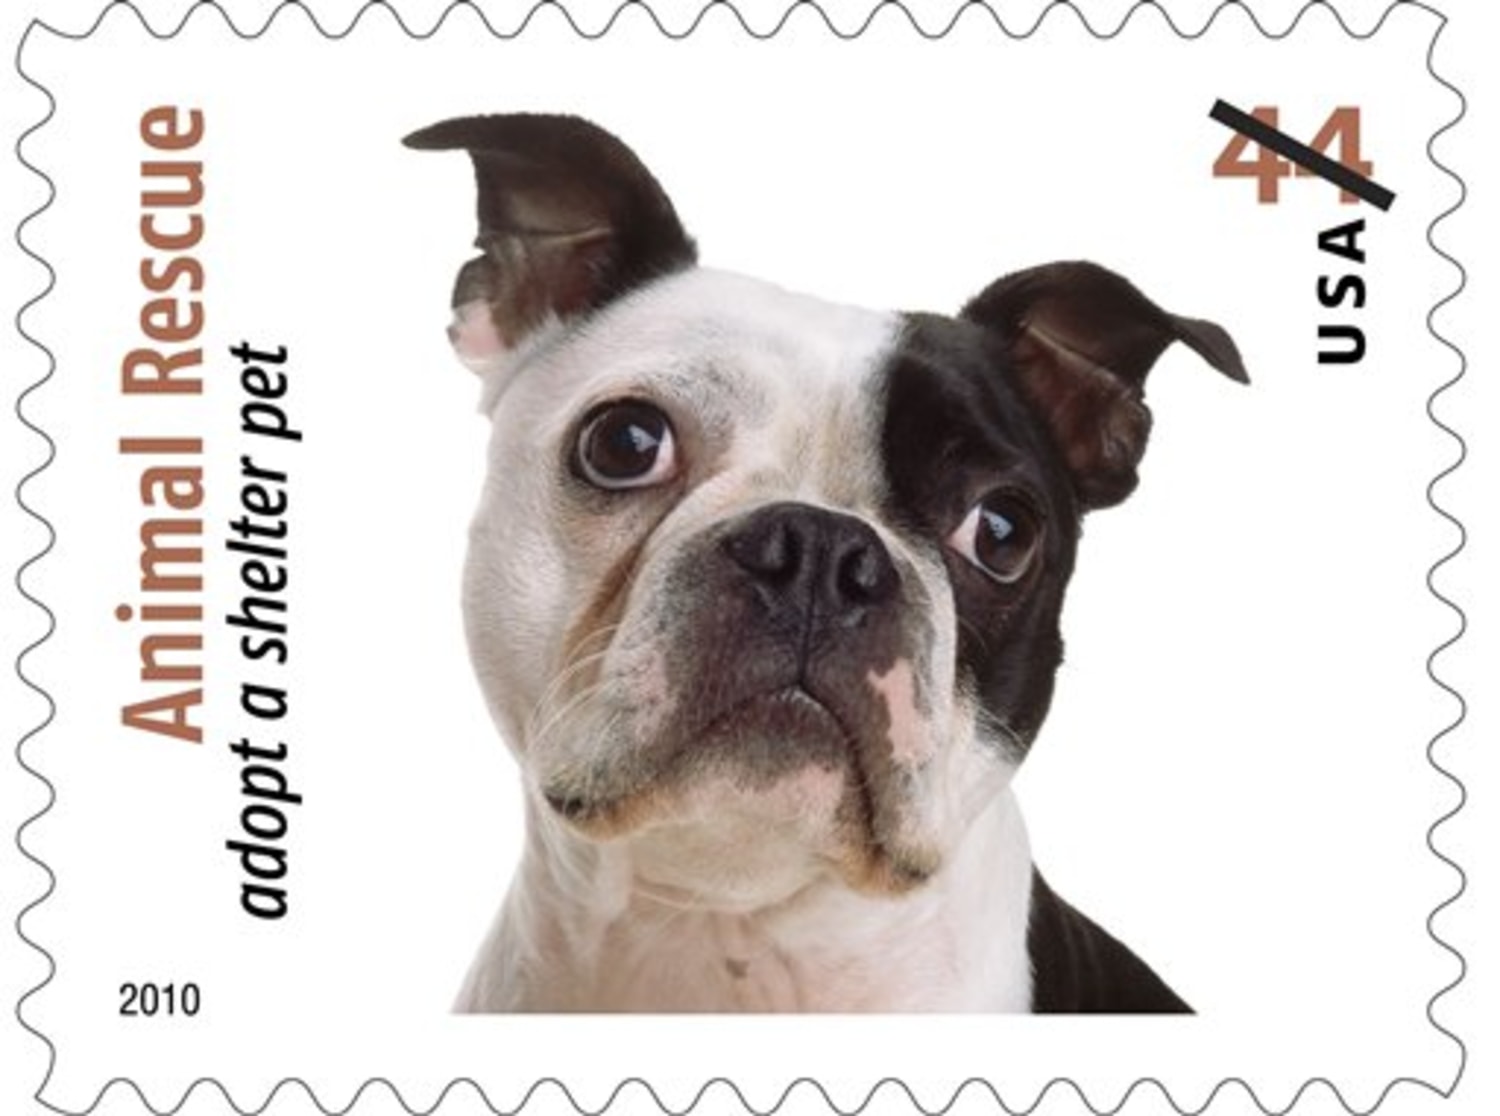 Post office releasing shelter animal stamps